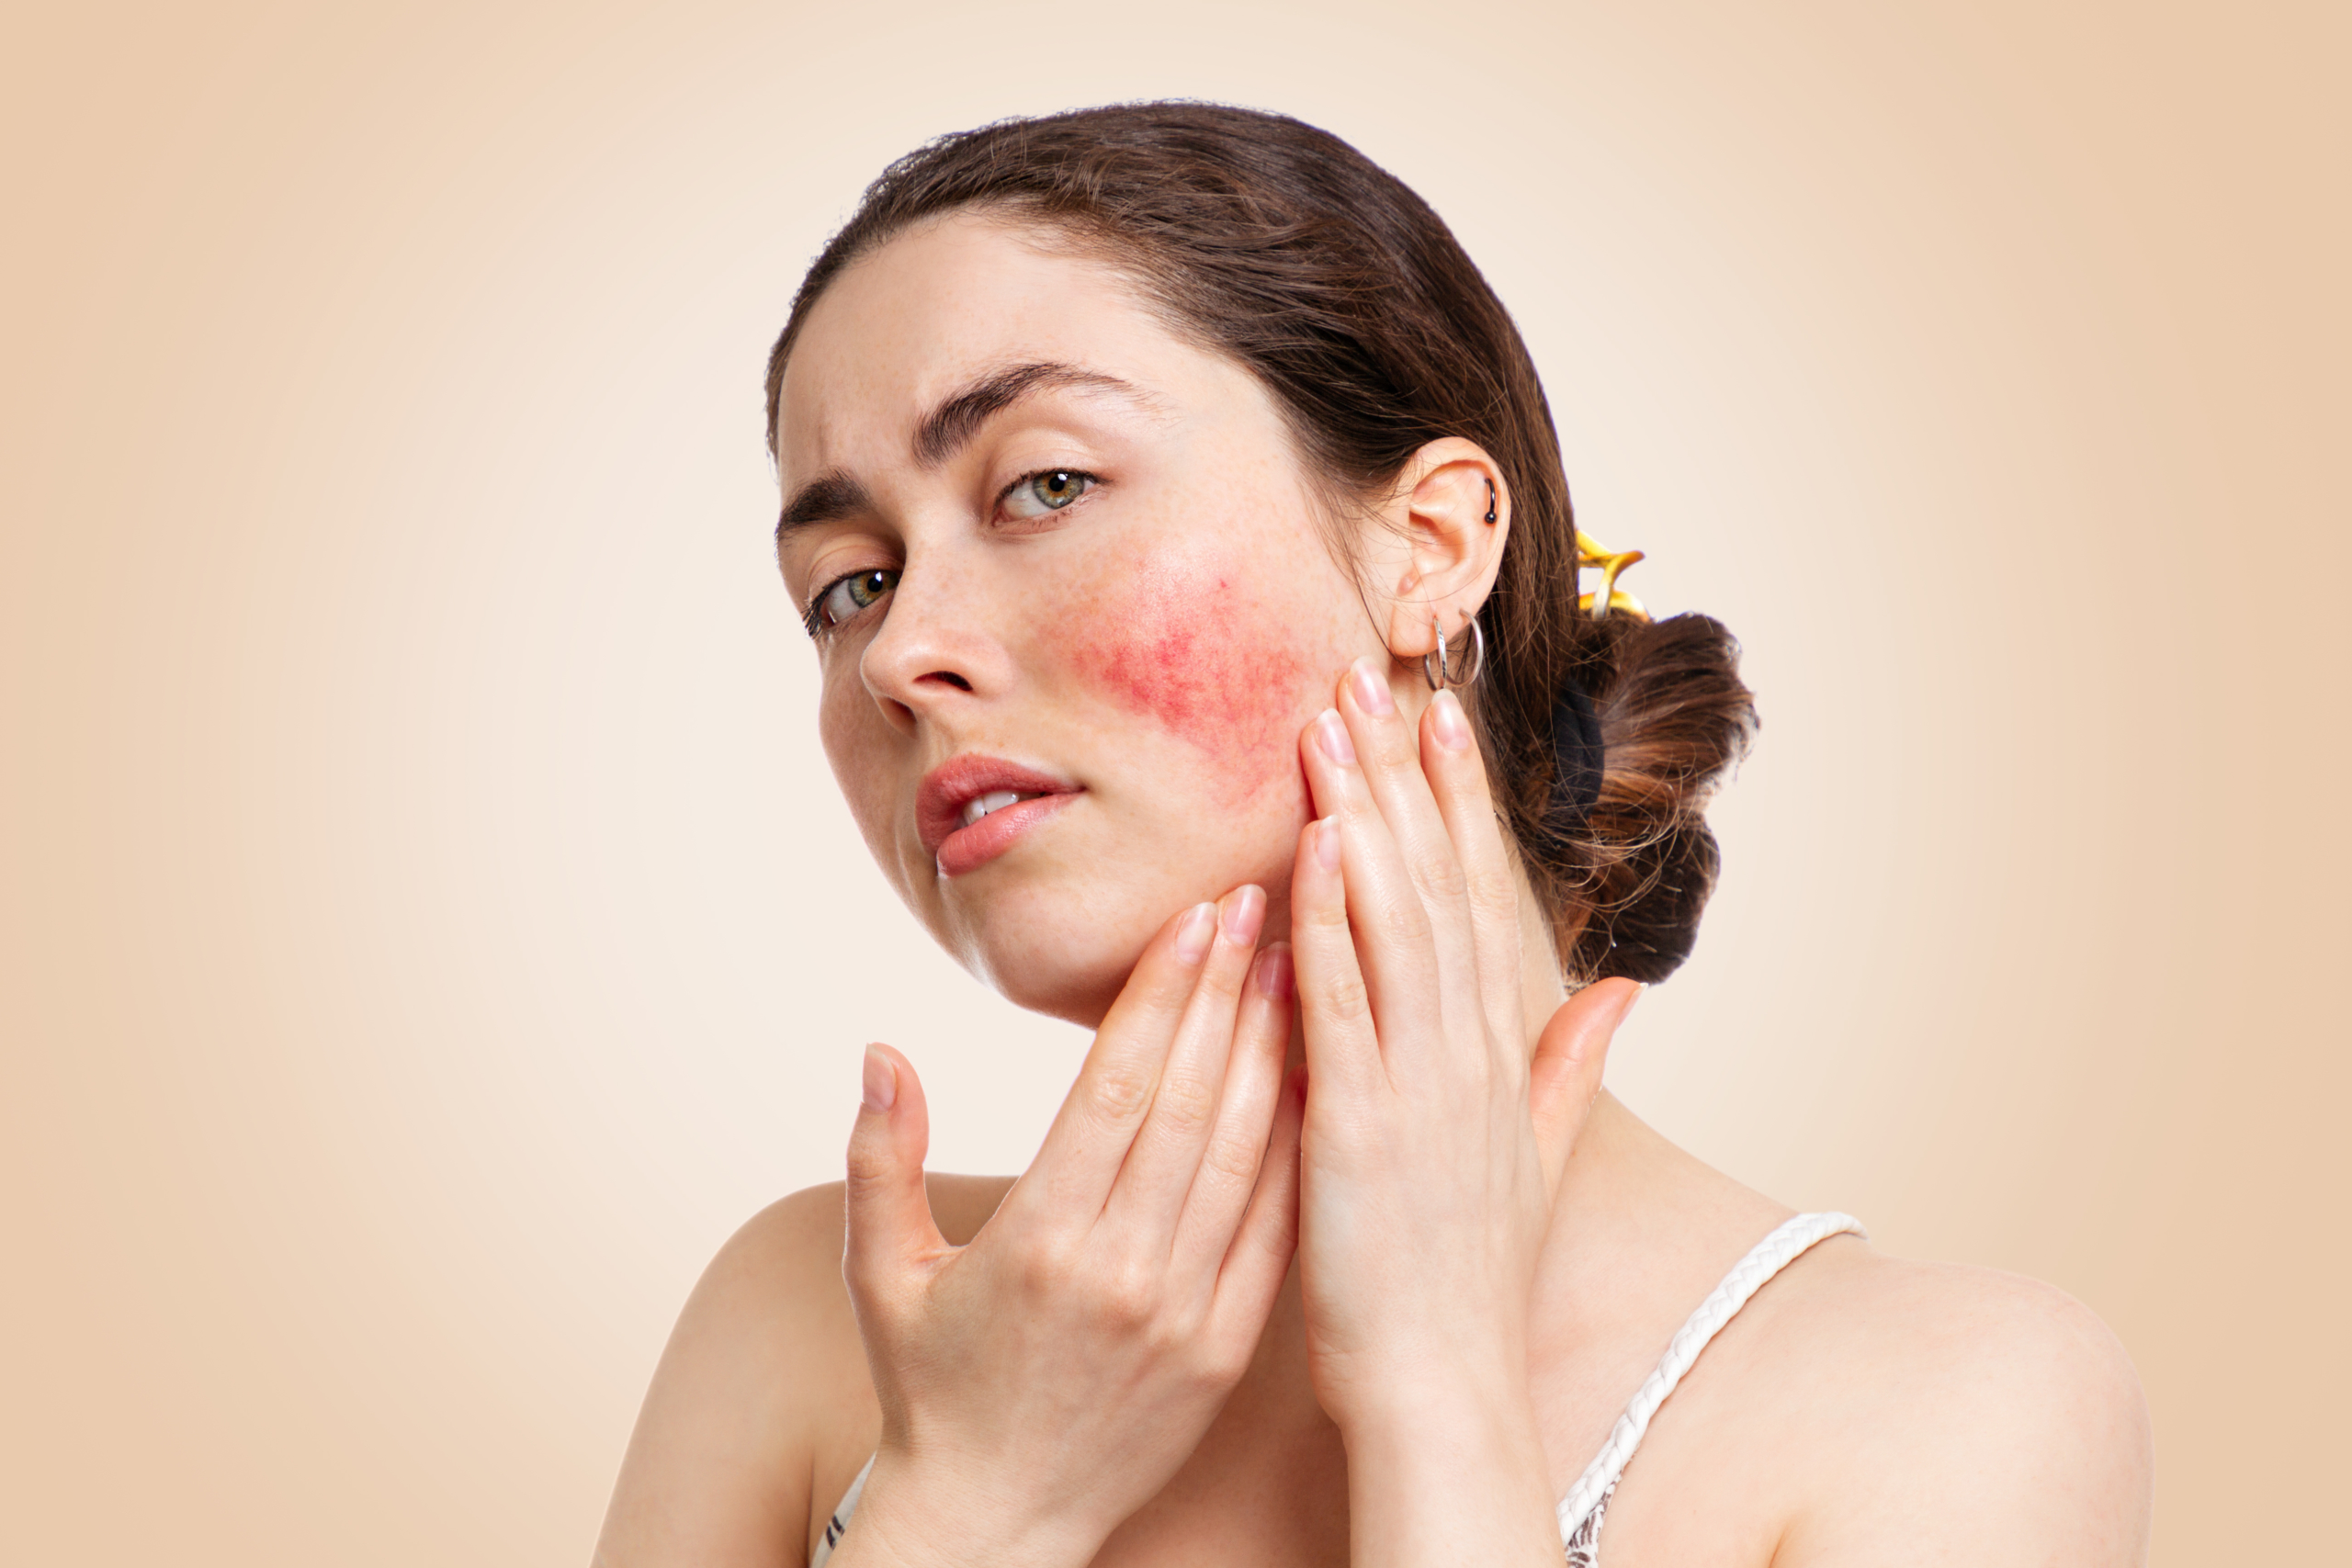 Young woman frowning with rosacea